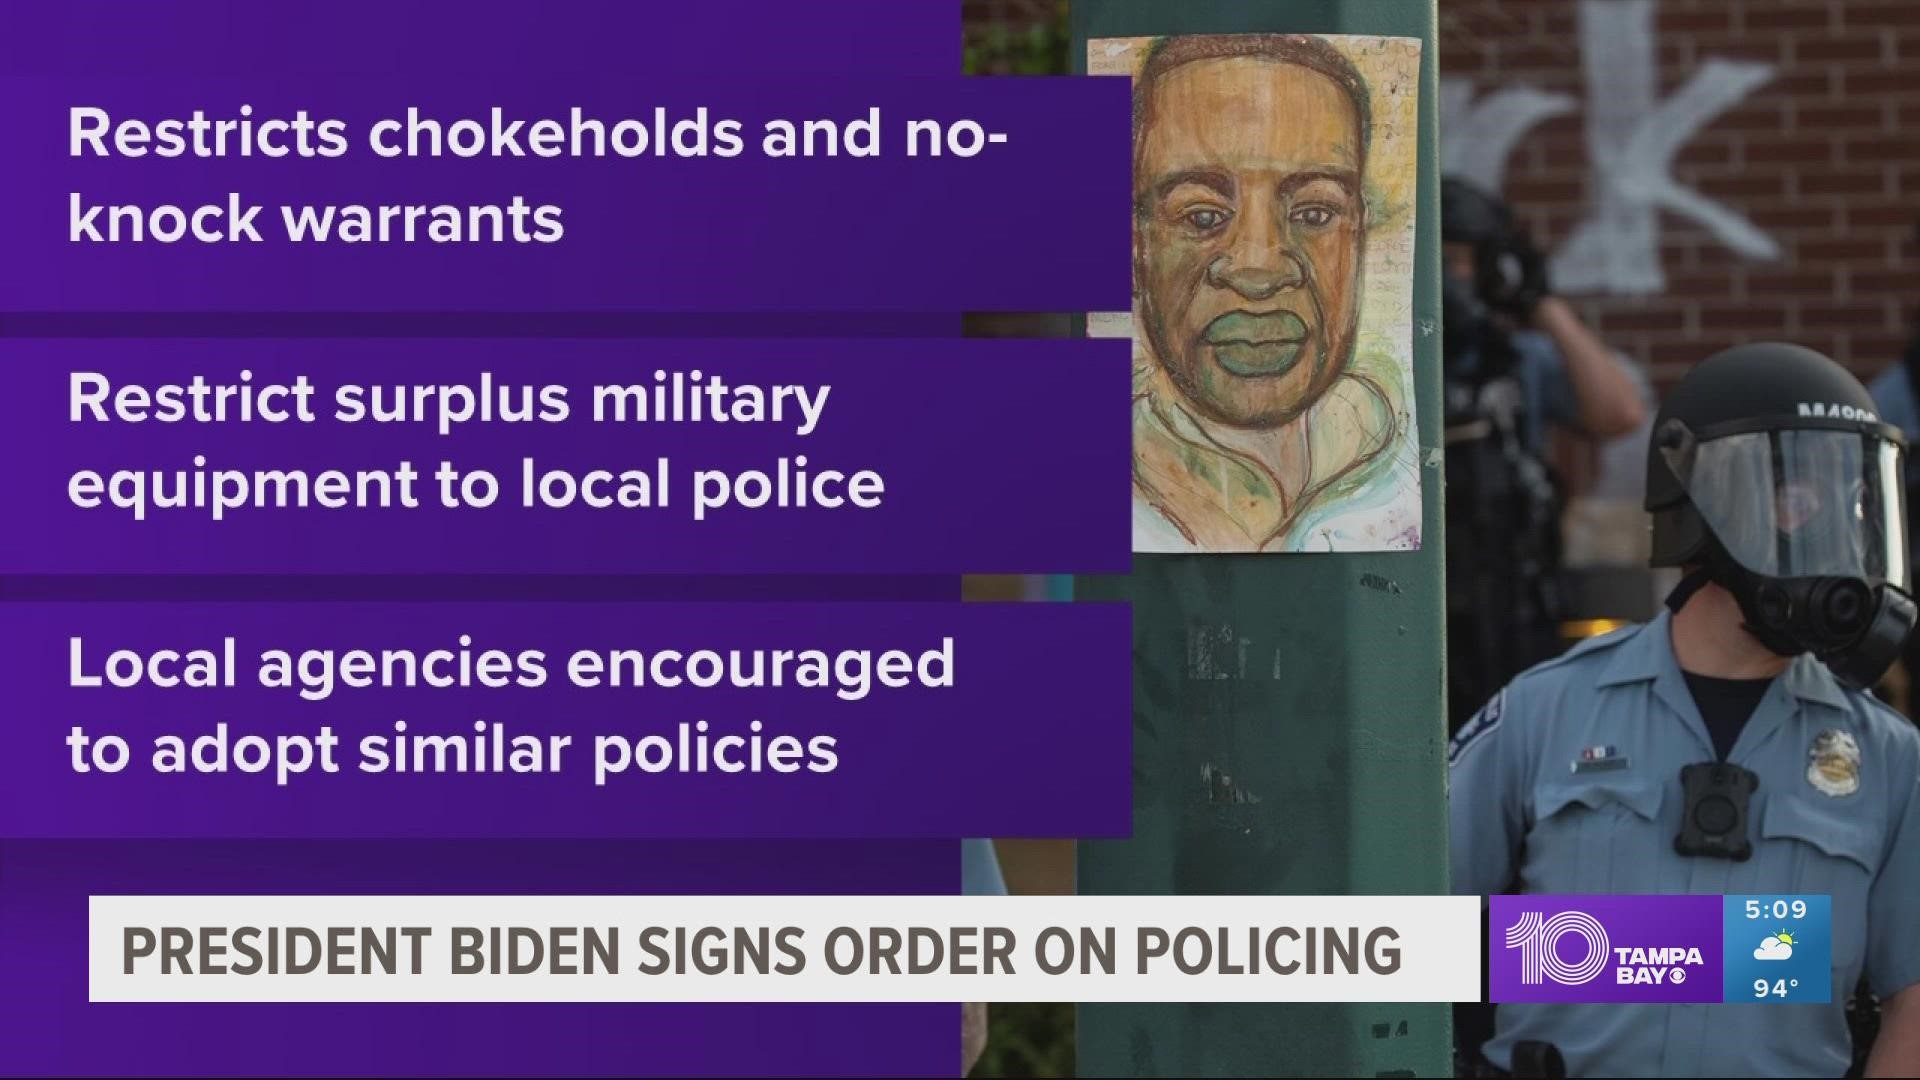 Prior to signing the order, Biden spoke about the reform, saying it will promote accountability, raise standards and modernize policing.